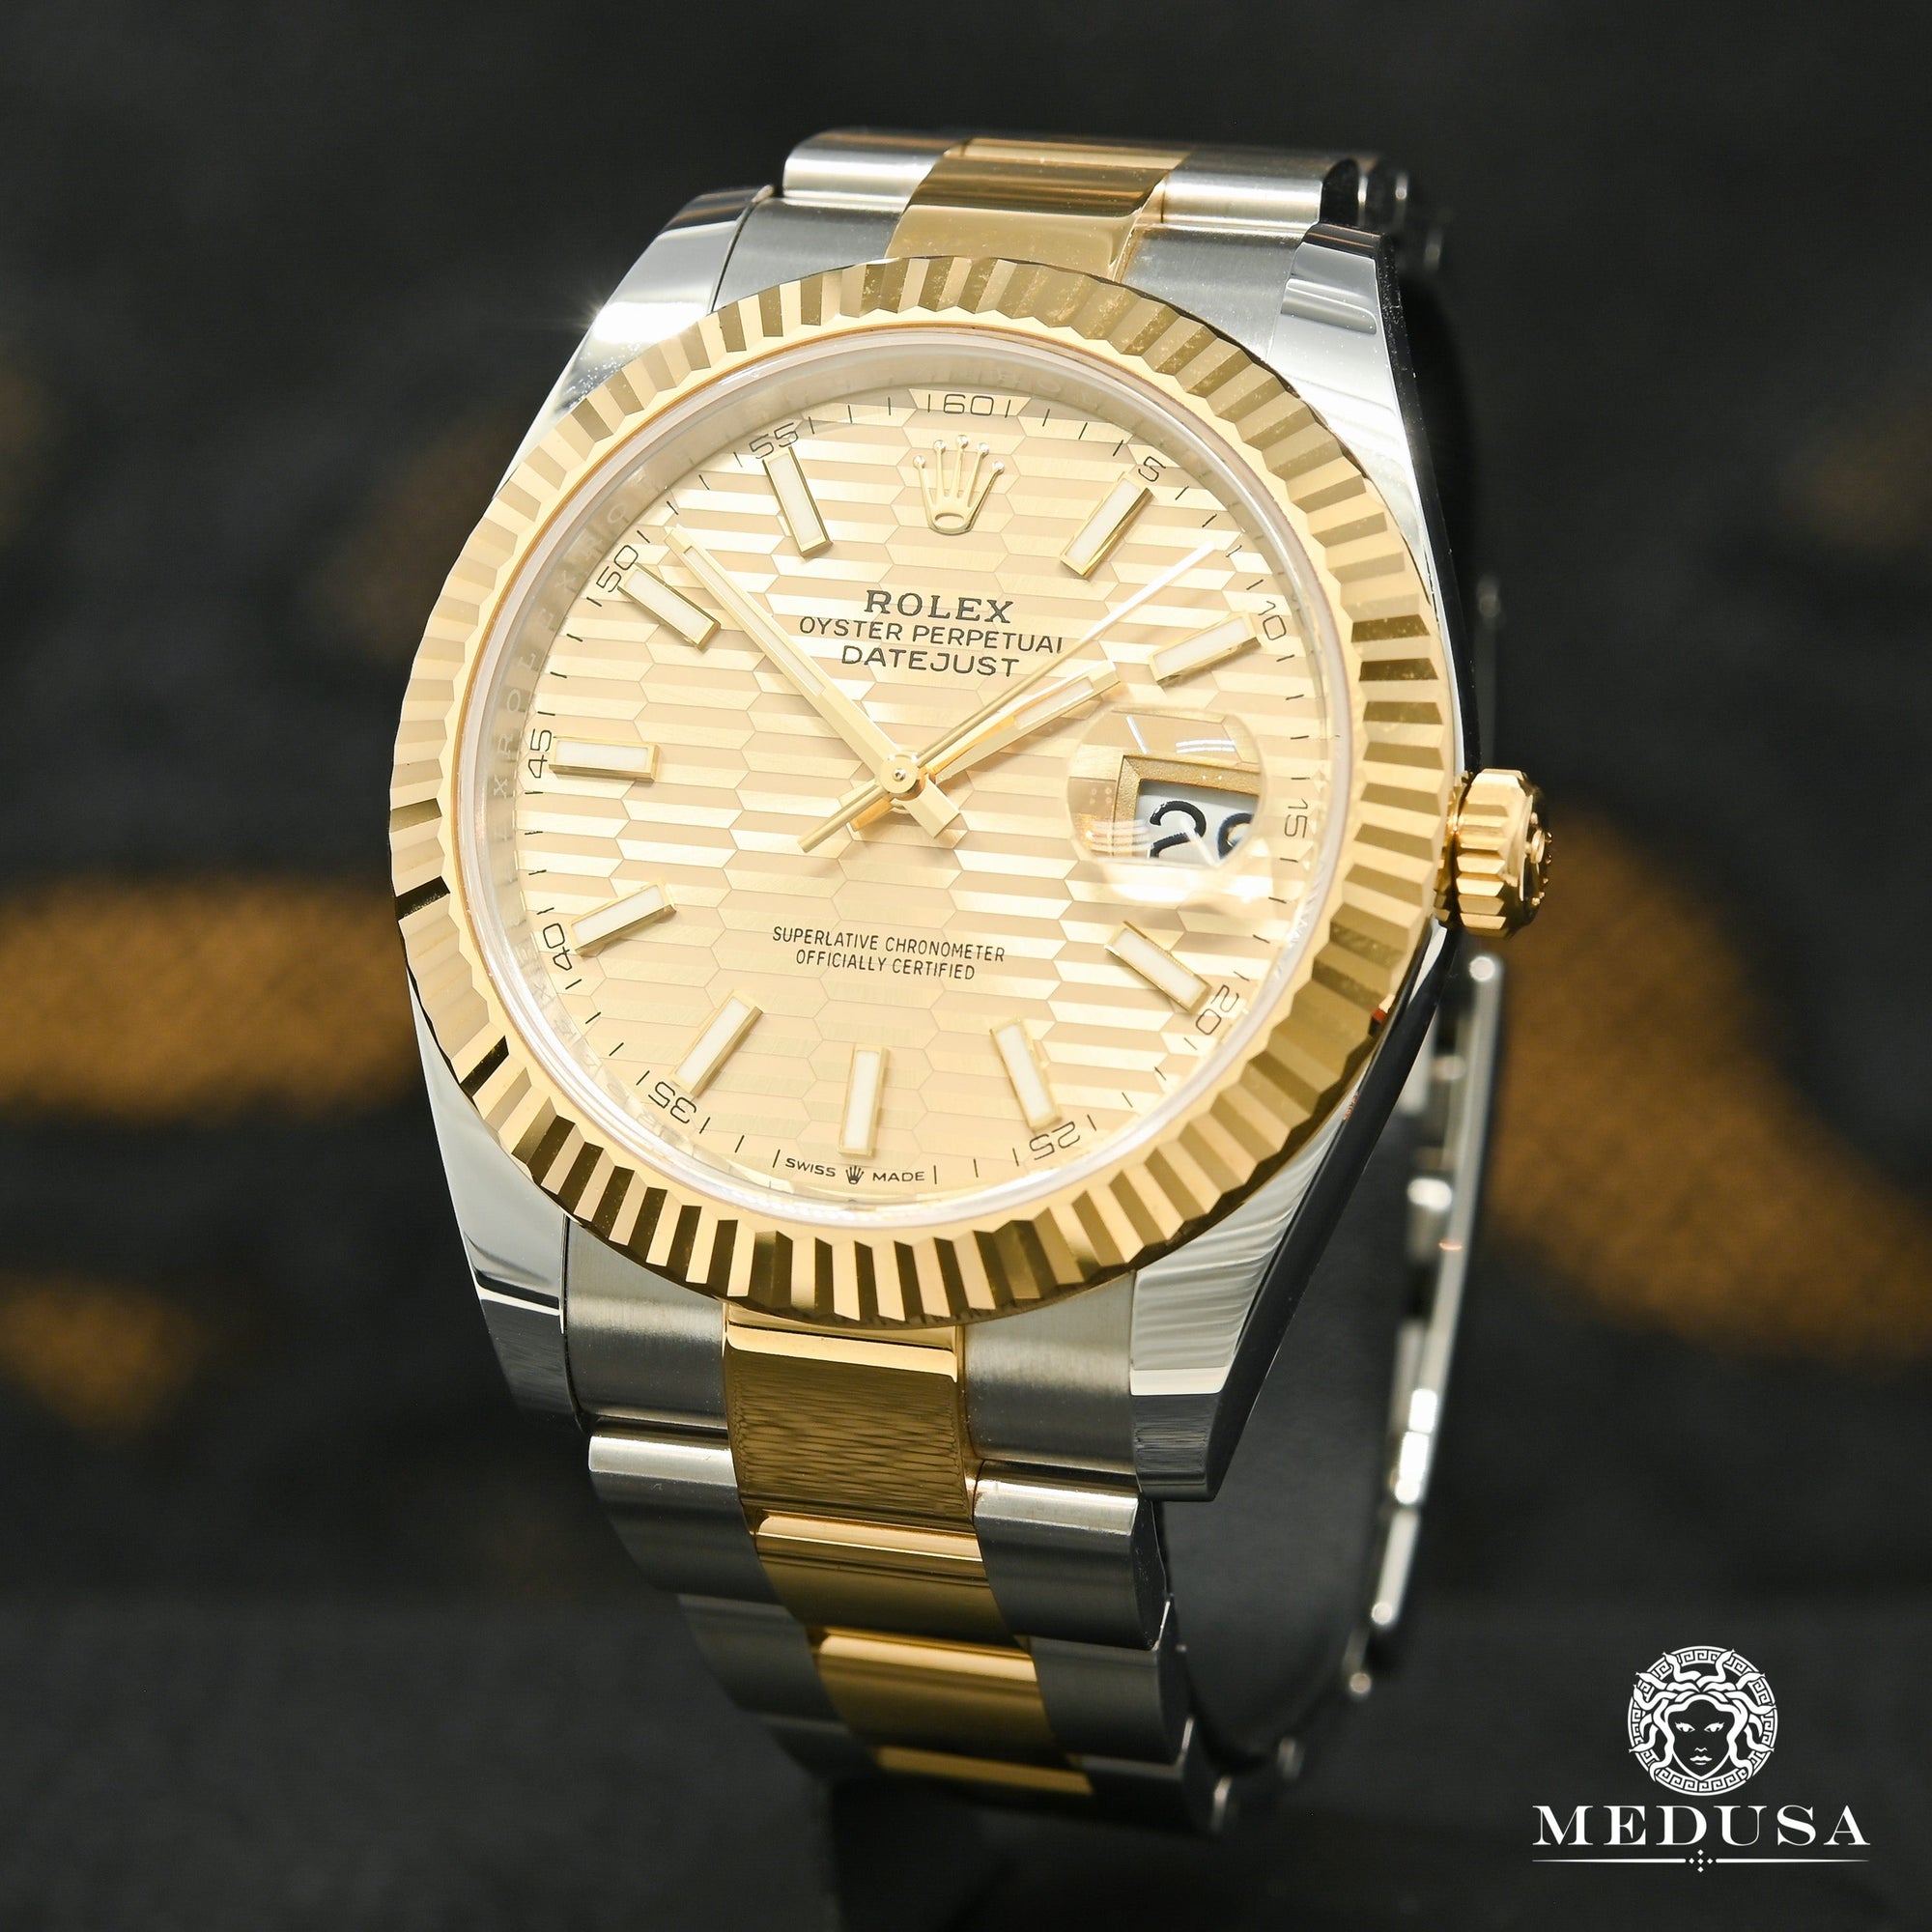 Montre Rolex | Homme Datejust 41mm - Oyster Champagne Motif Or 2 Tons